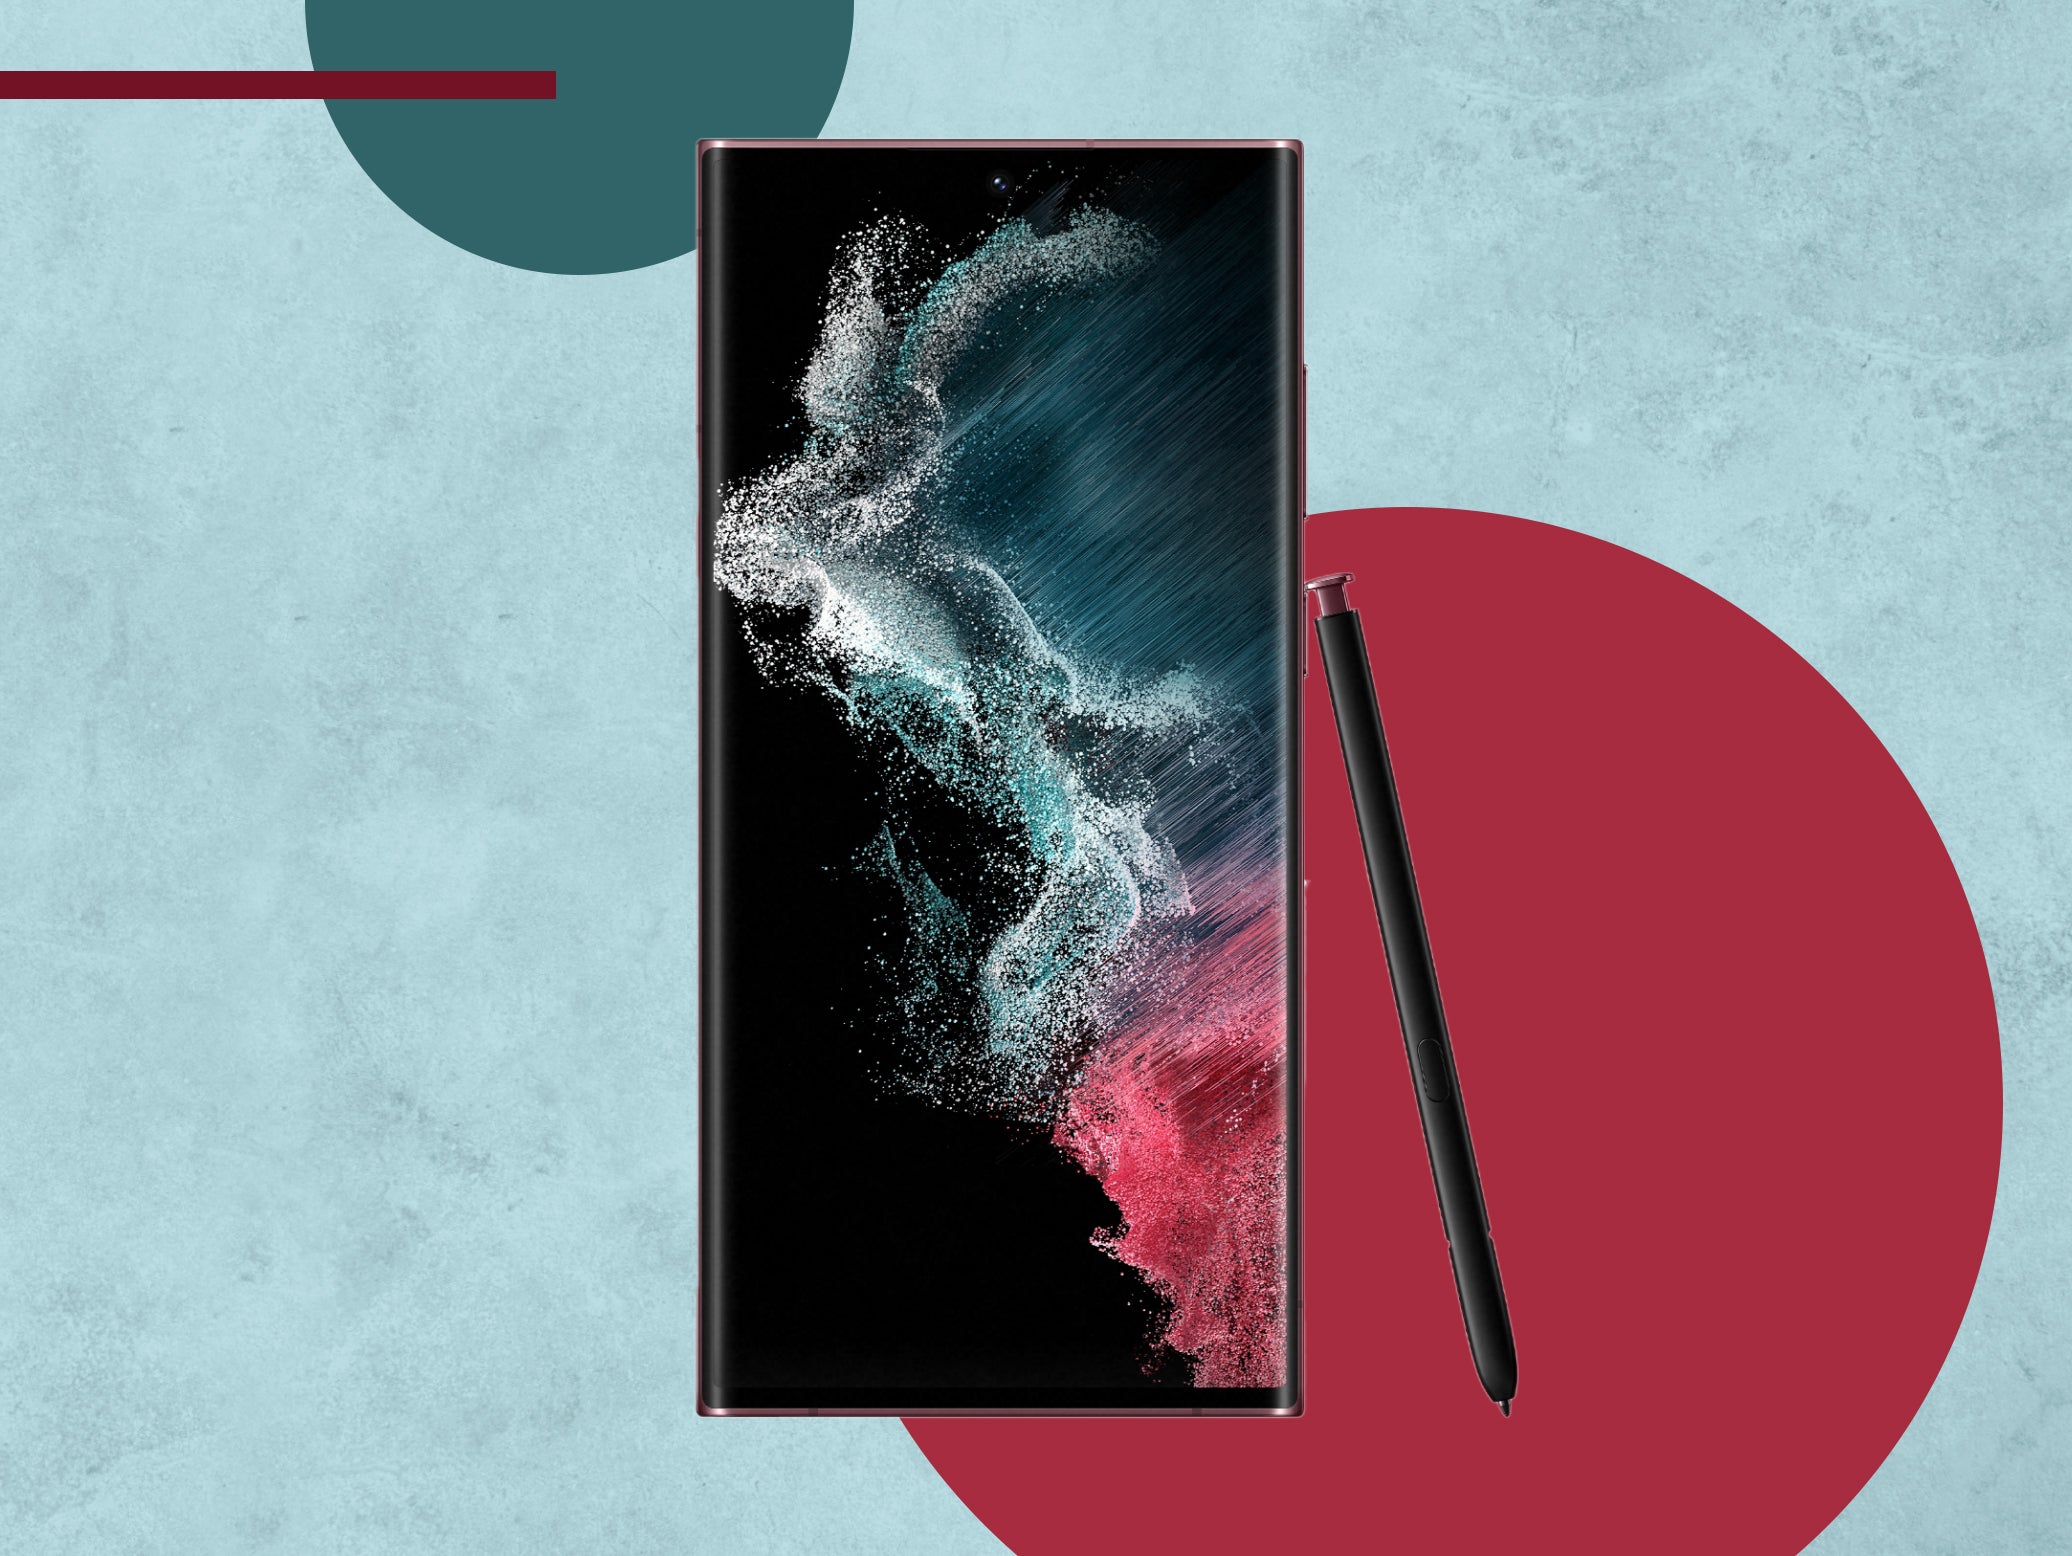 The device measures 163.3mm tall and comes with the S-Pen included